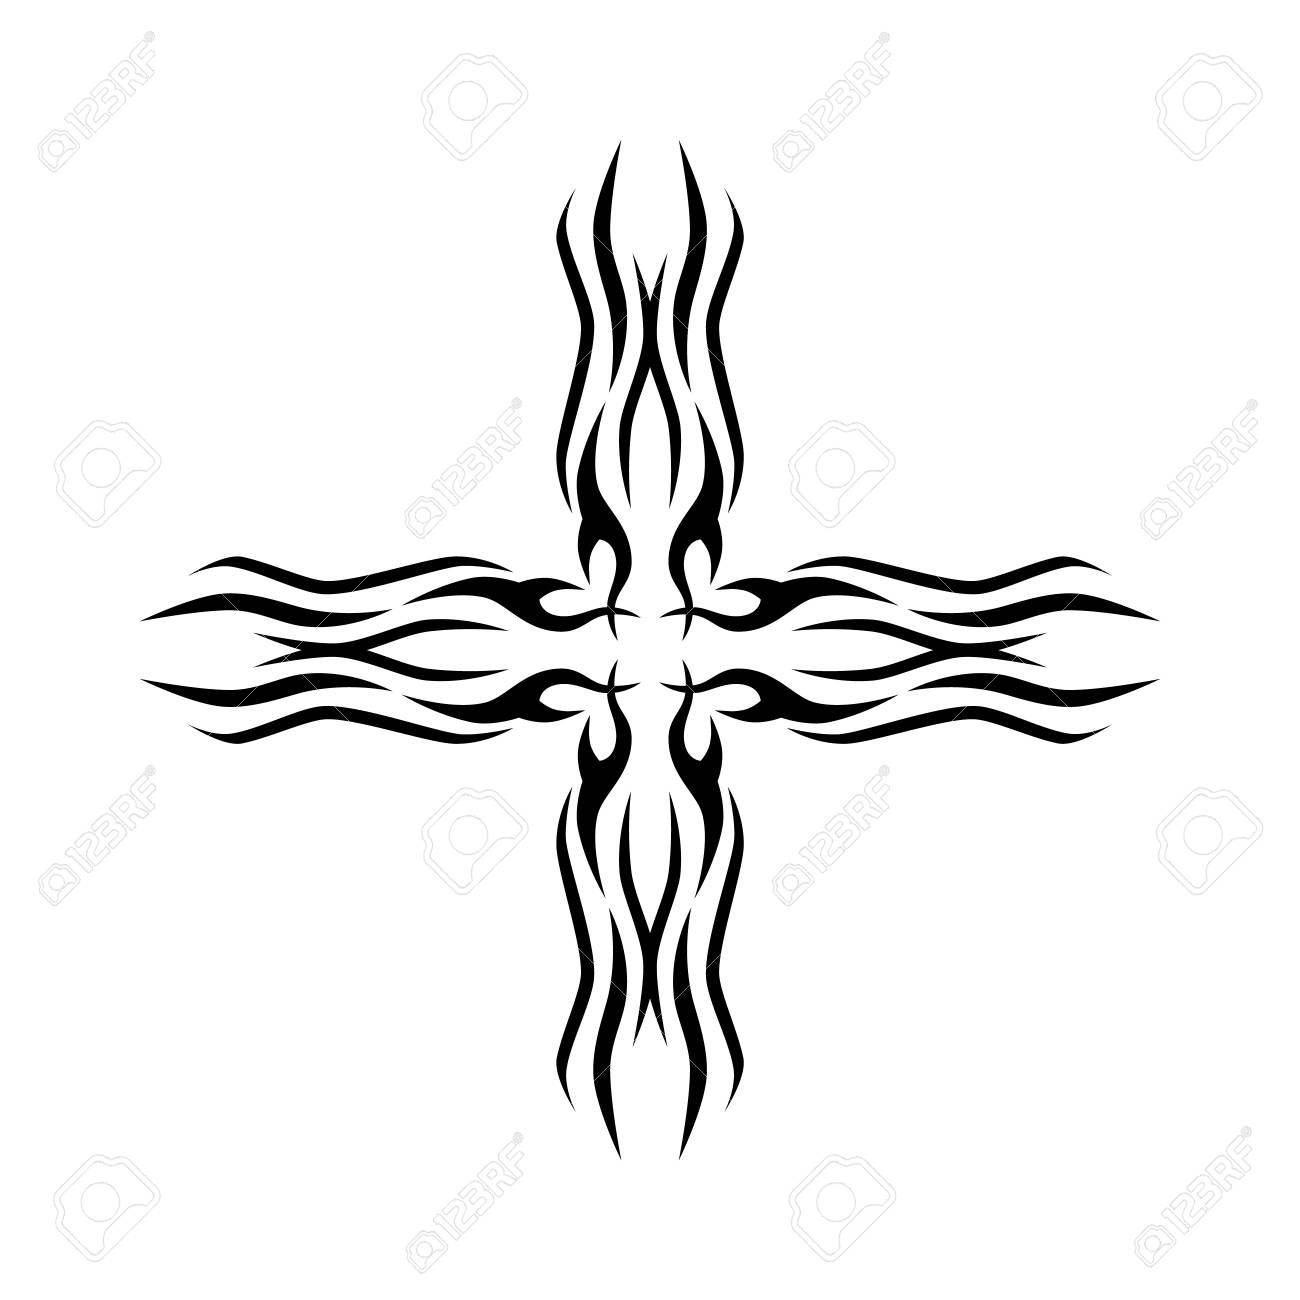 Tattoo Tribal Cross Designs Vector Sketch Of A Tattoo Art Tribal with regard to size 1300 X 1300